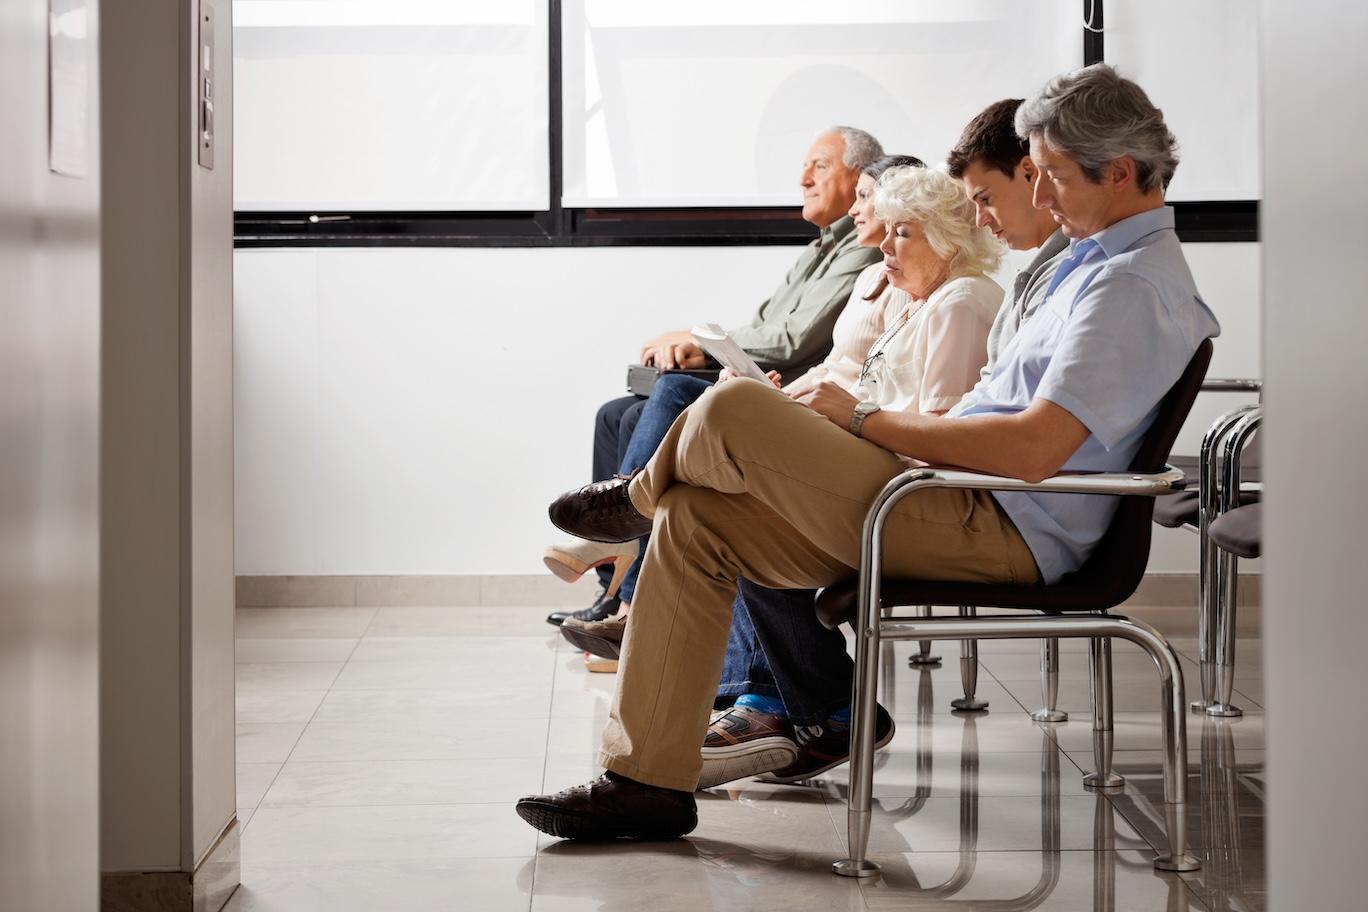 7 Ways Overcrowded EDs Can Address Patient Experience